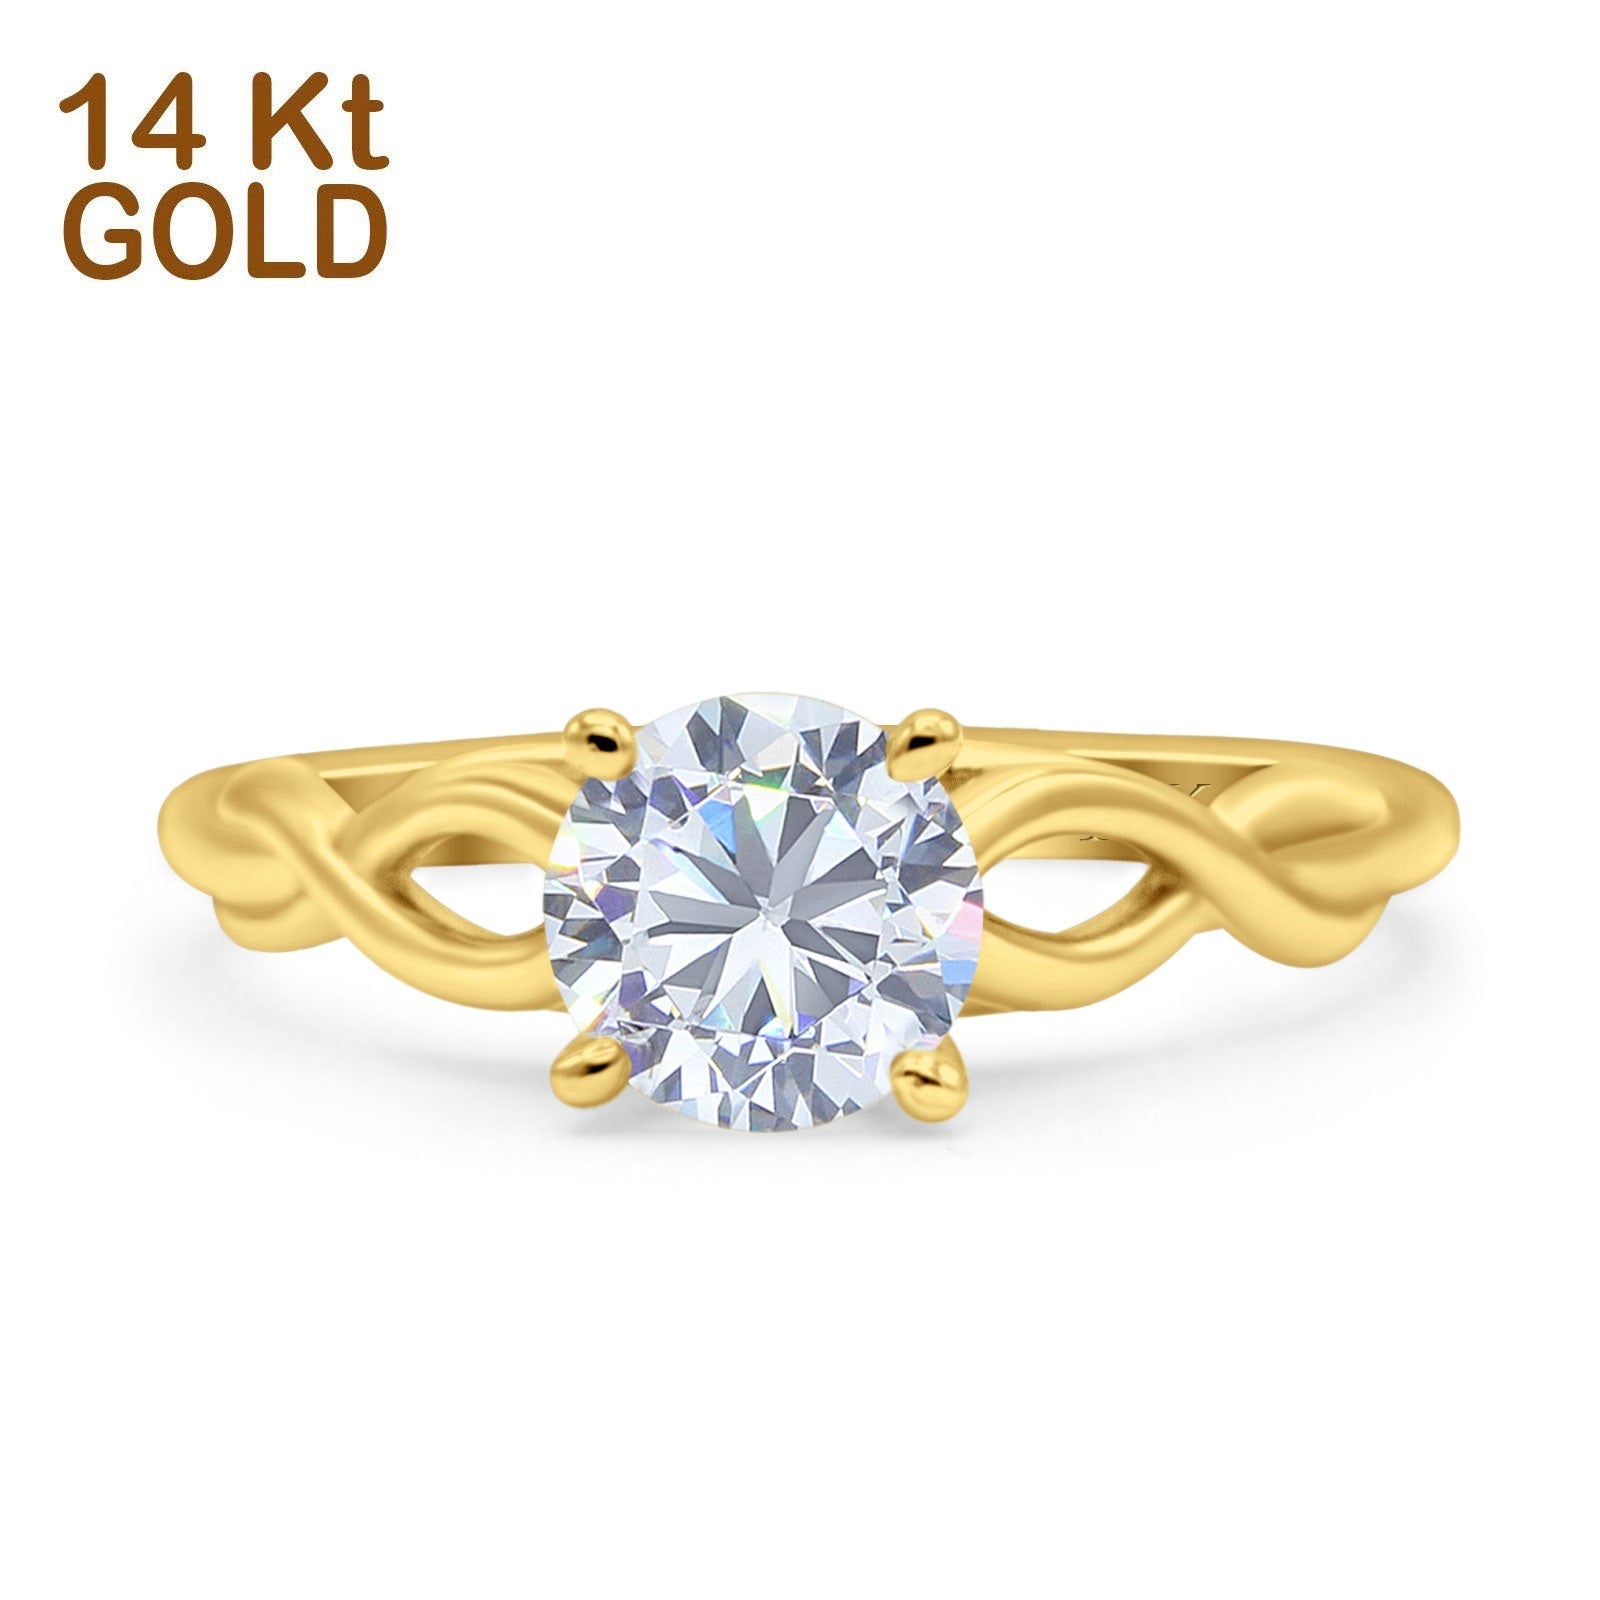 0.03 Carat G-H White Diamond Dainty Ring in 14k Solid Gold